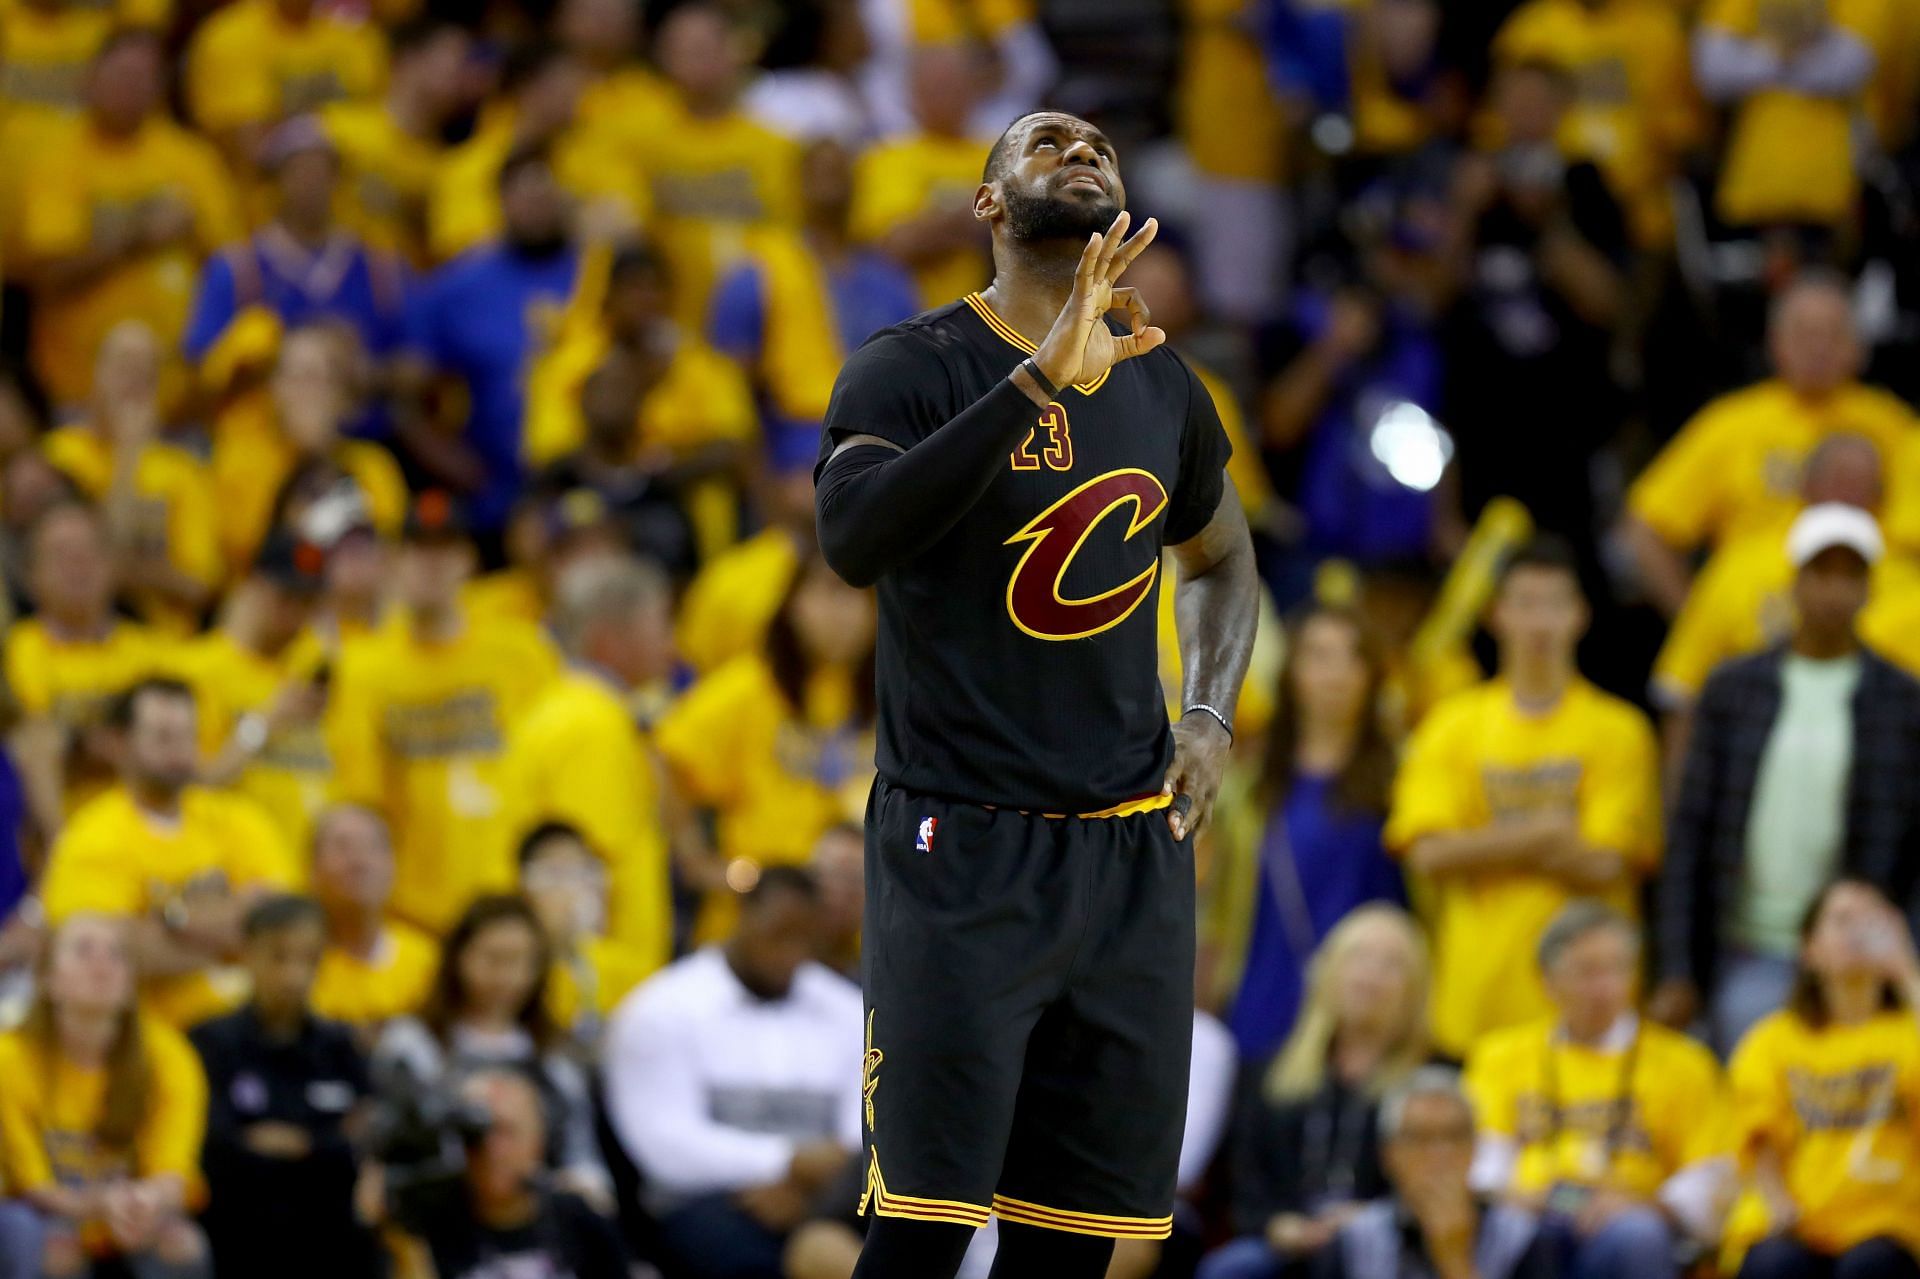 LeBron James #23 of the Cleveland Cavaliers reacts to a play against the Golden State Warriors in Game 7 of the 2016 NBA Finals at ORACLE Arena on June 19, 2016 in Oakland, California.